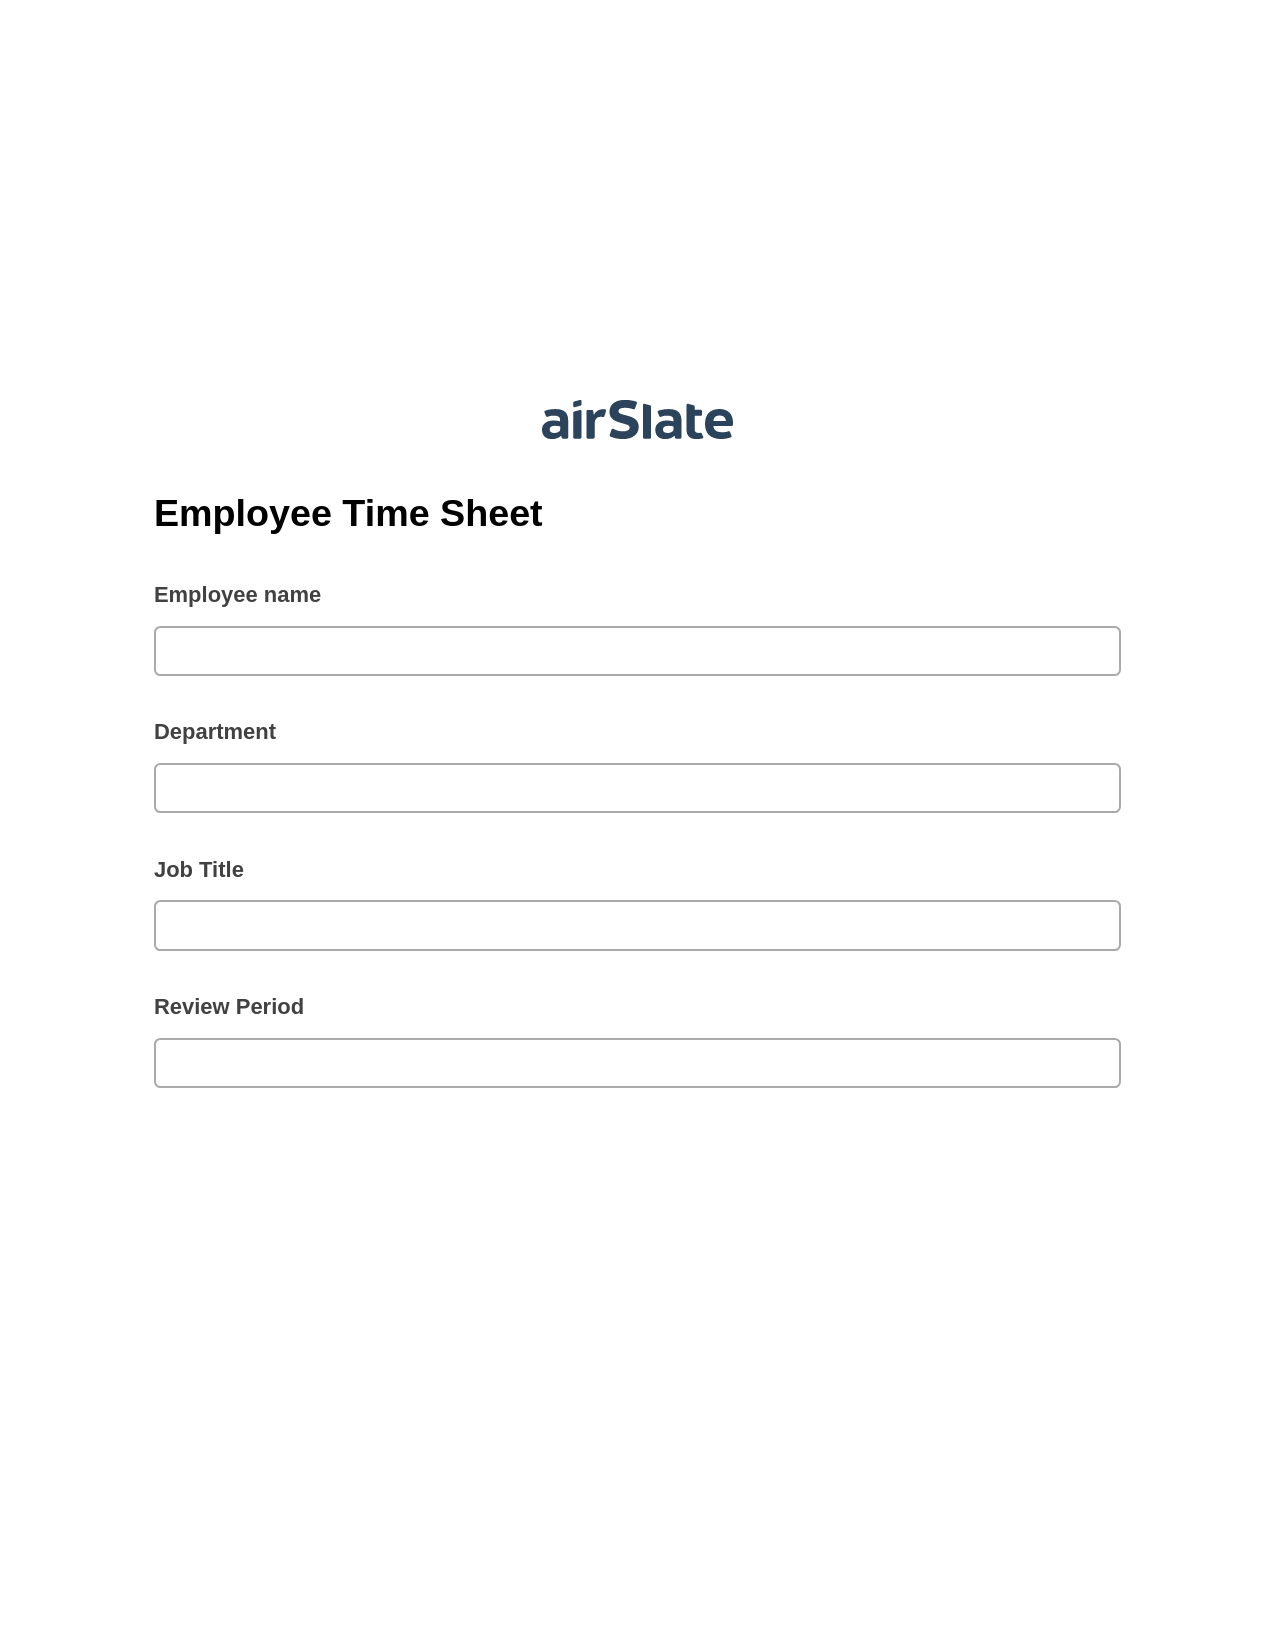 Multirole Employee Time Sheet Pre-fill from MS Dynamics 365 Records, Create Salesforce Records Bot, Export to Salesforce Record Bot